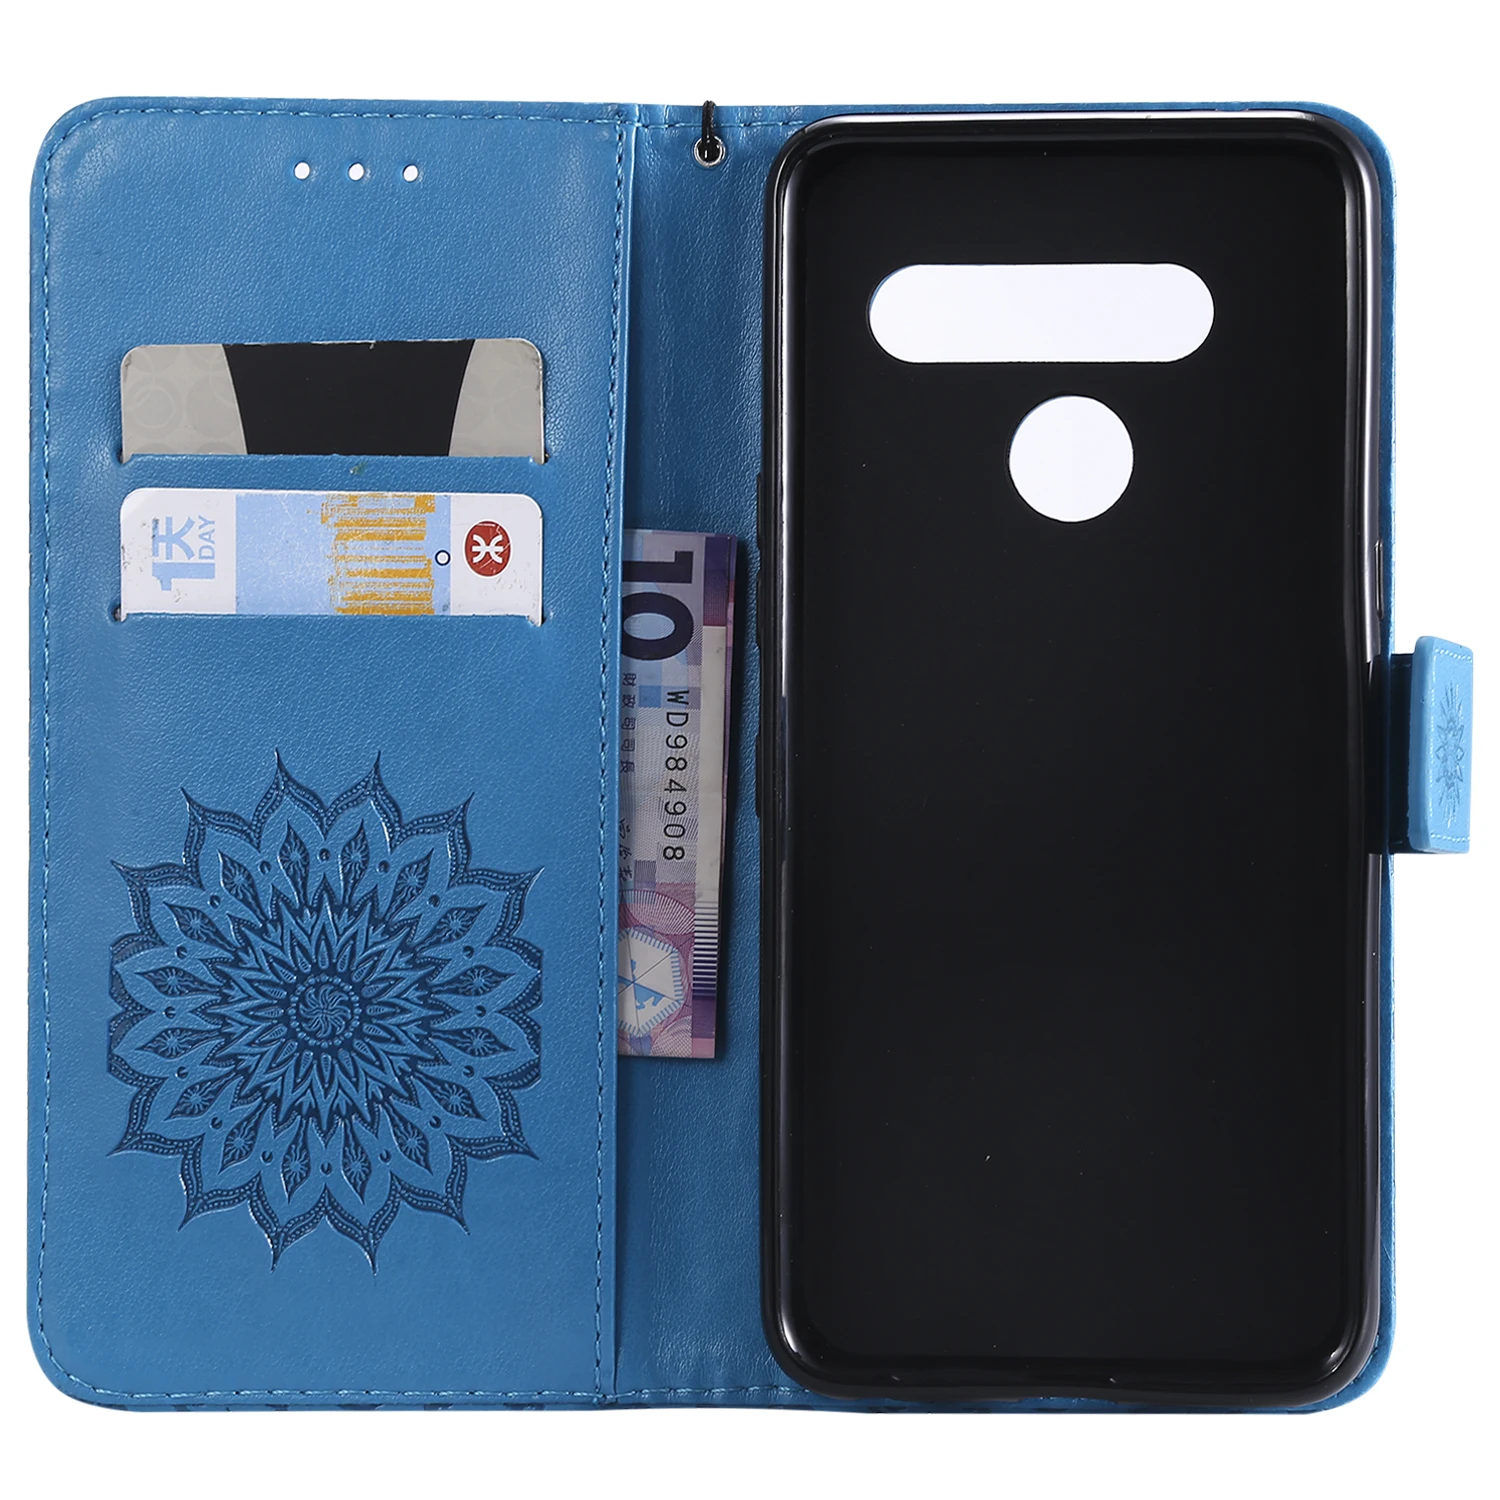 New Sun flower Solid color Flip Wallet Case PU Leather Phone for iphone touch5 5 6 7 8 plus XR X XS 6.1 5.8 6.5 Max 2019 |